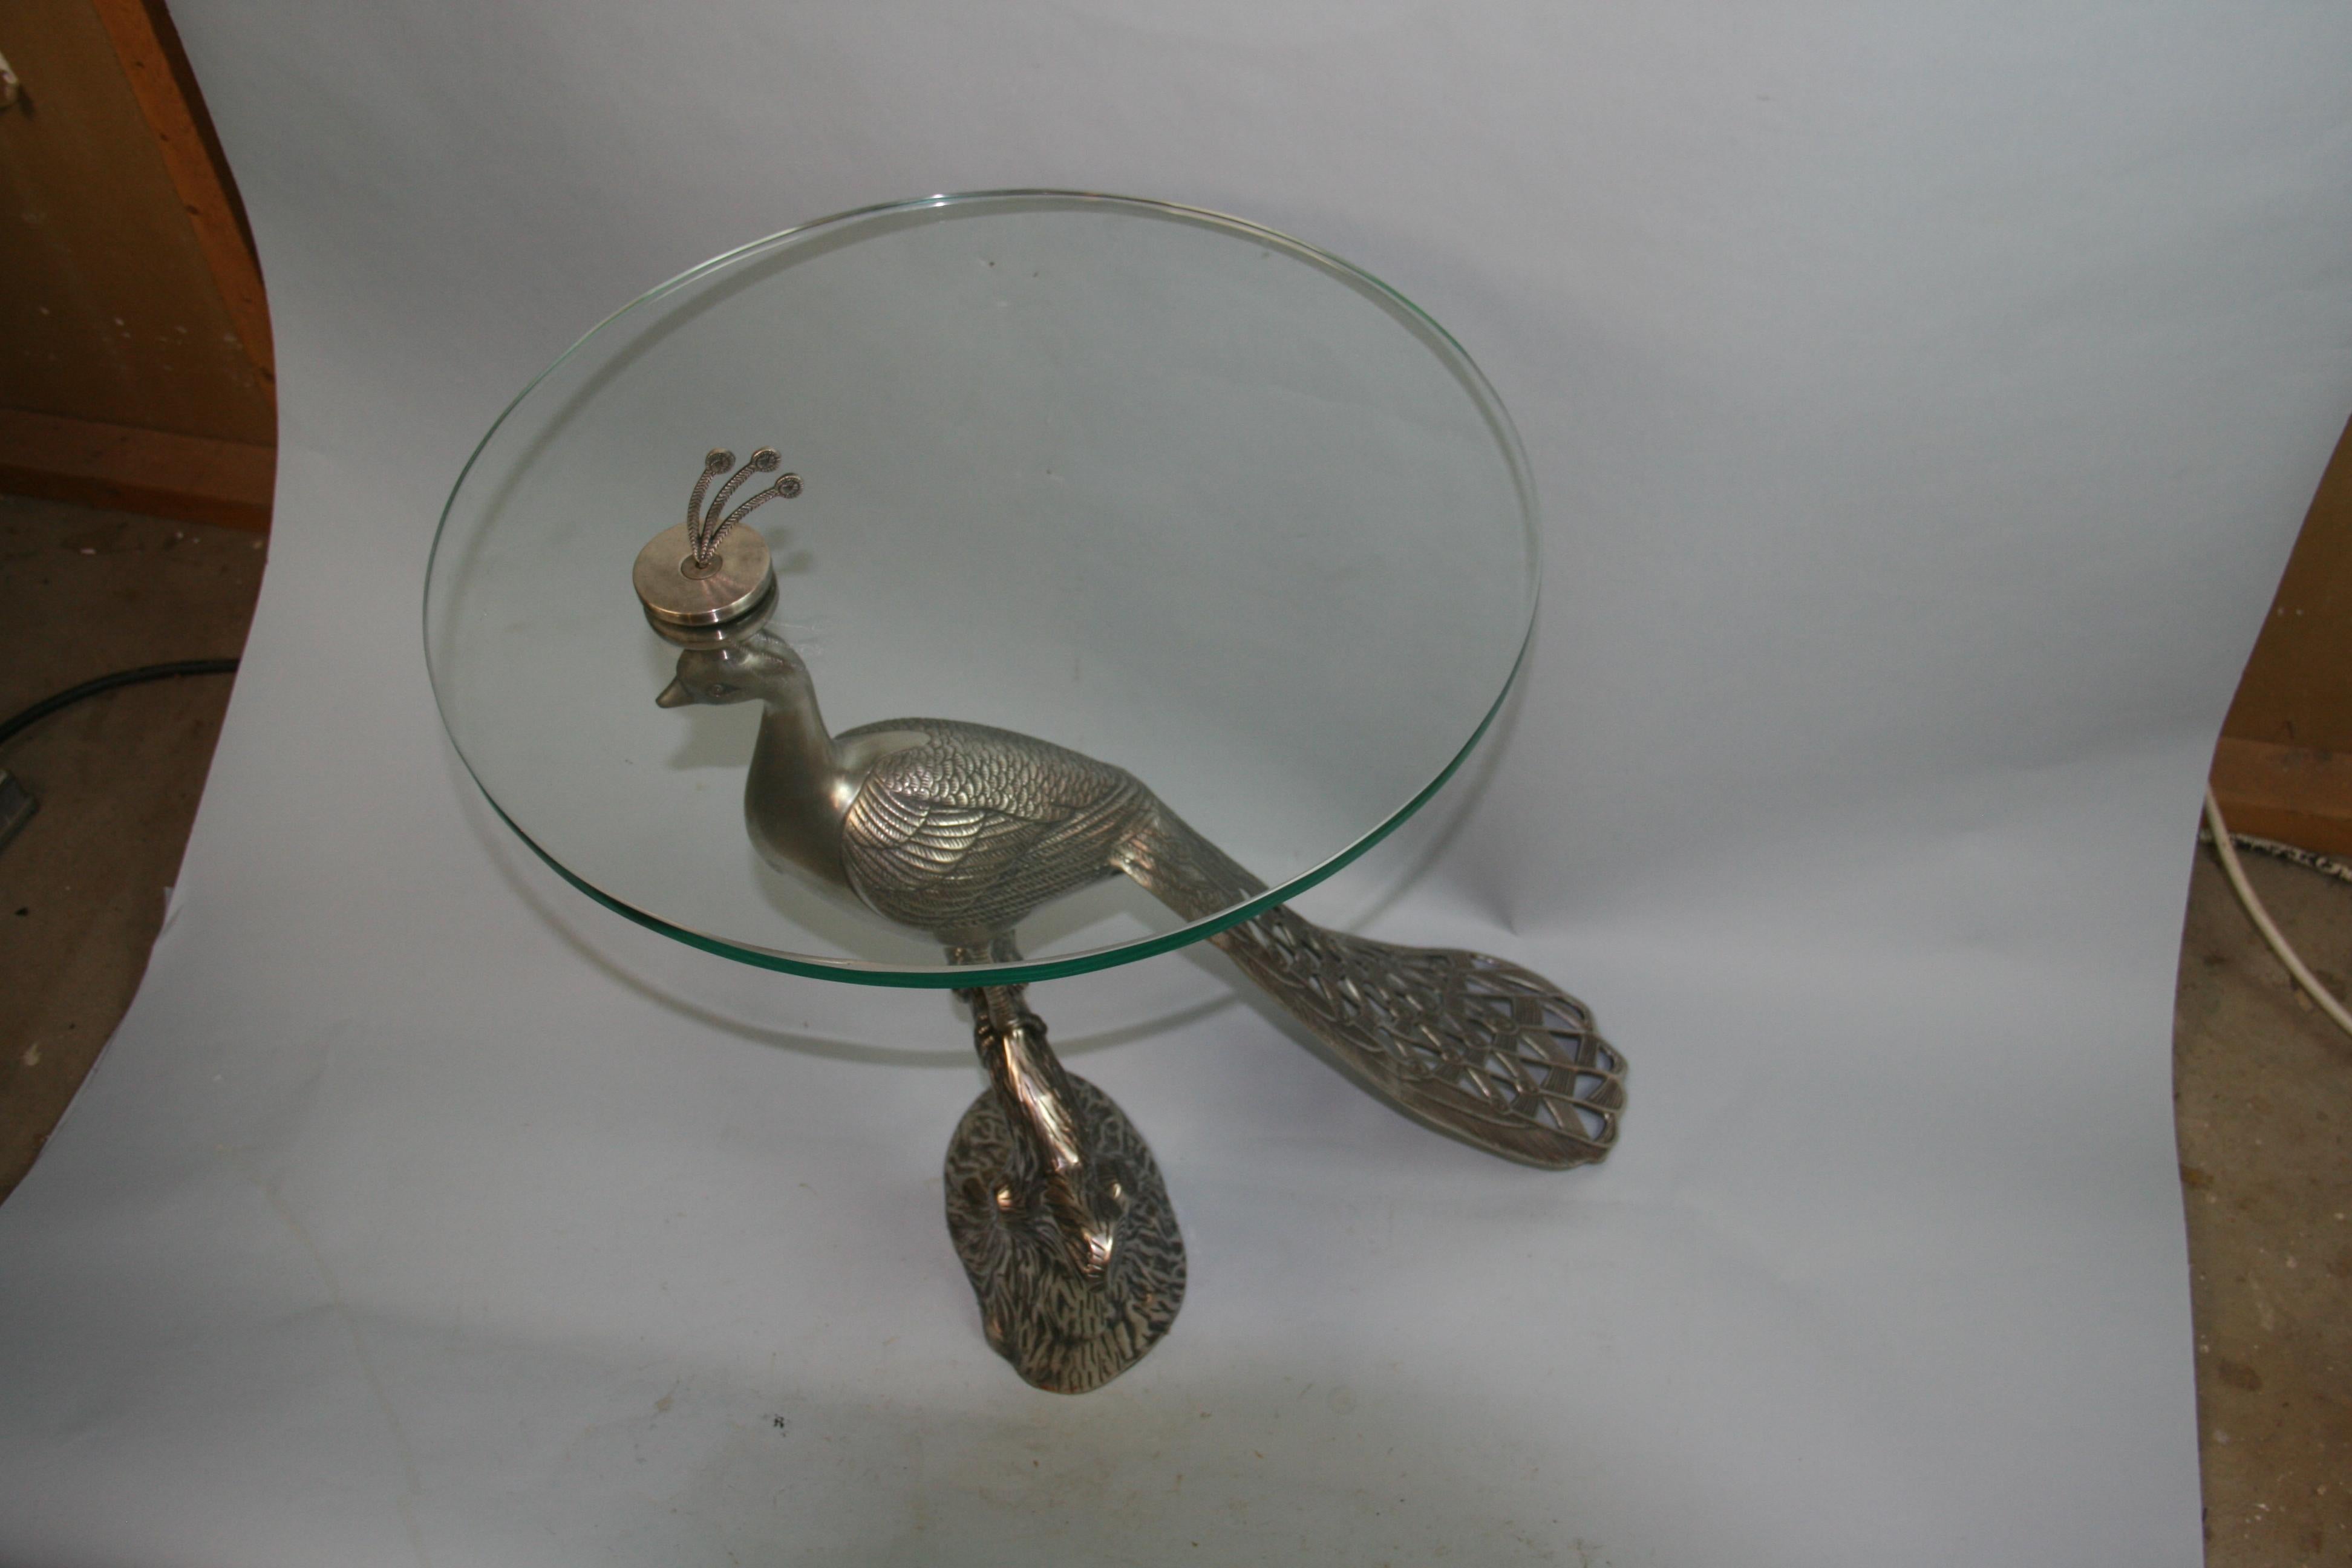 1276 Well detailed Hollywood Regency nickel plated brass peacock table with glass top.
The charming vintage peacock table is the perfect side table,drink table,or gueridon.